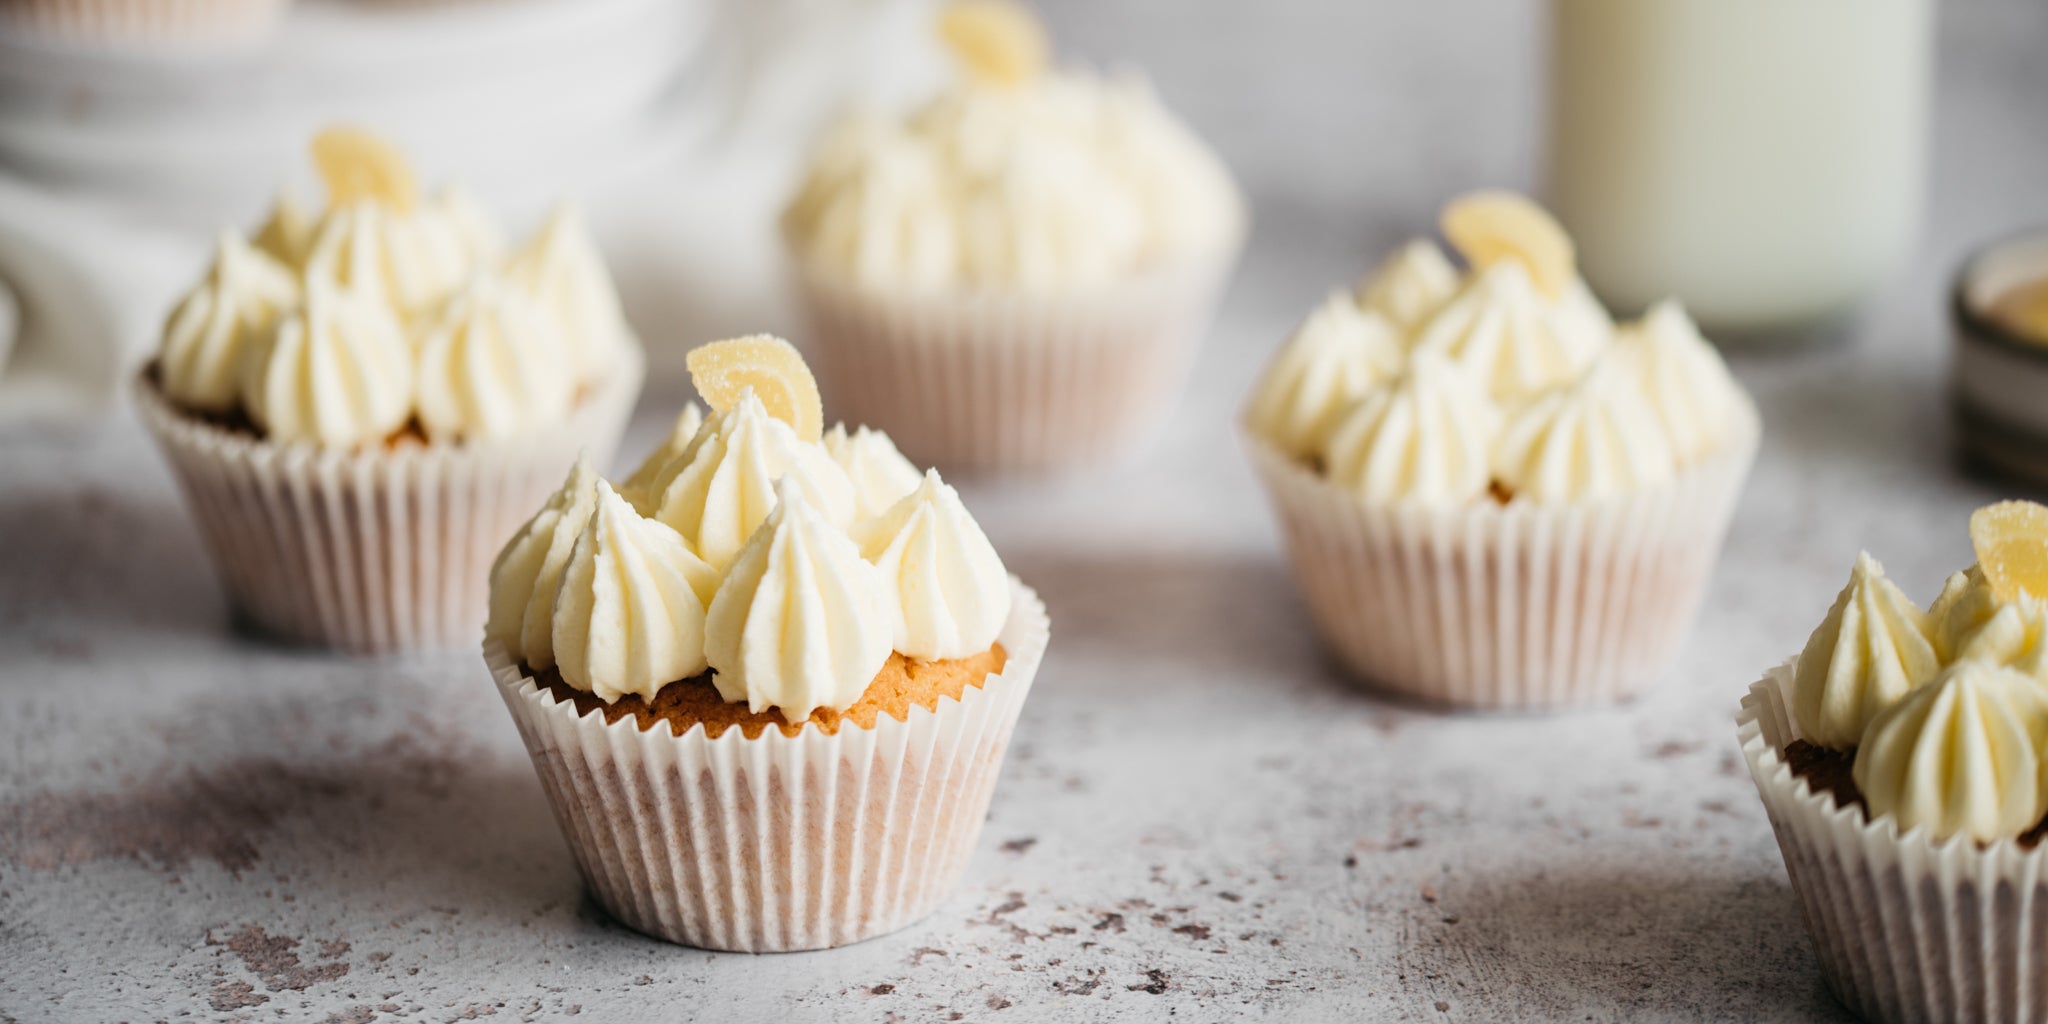 Close up of Lemon Cupcakes delicately piped with lemon buttercream and garnished with lemon